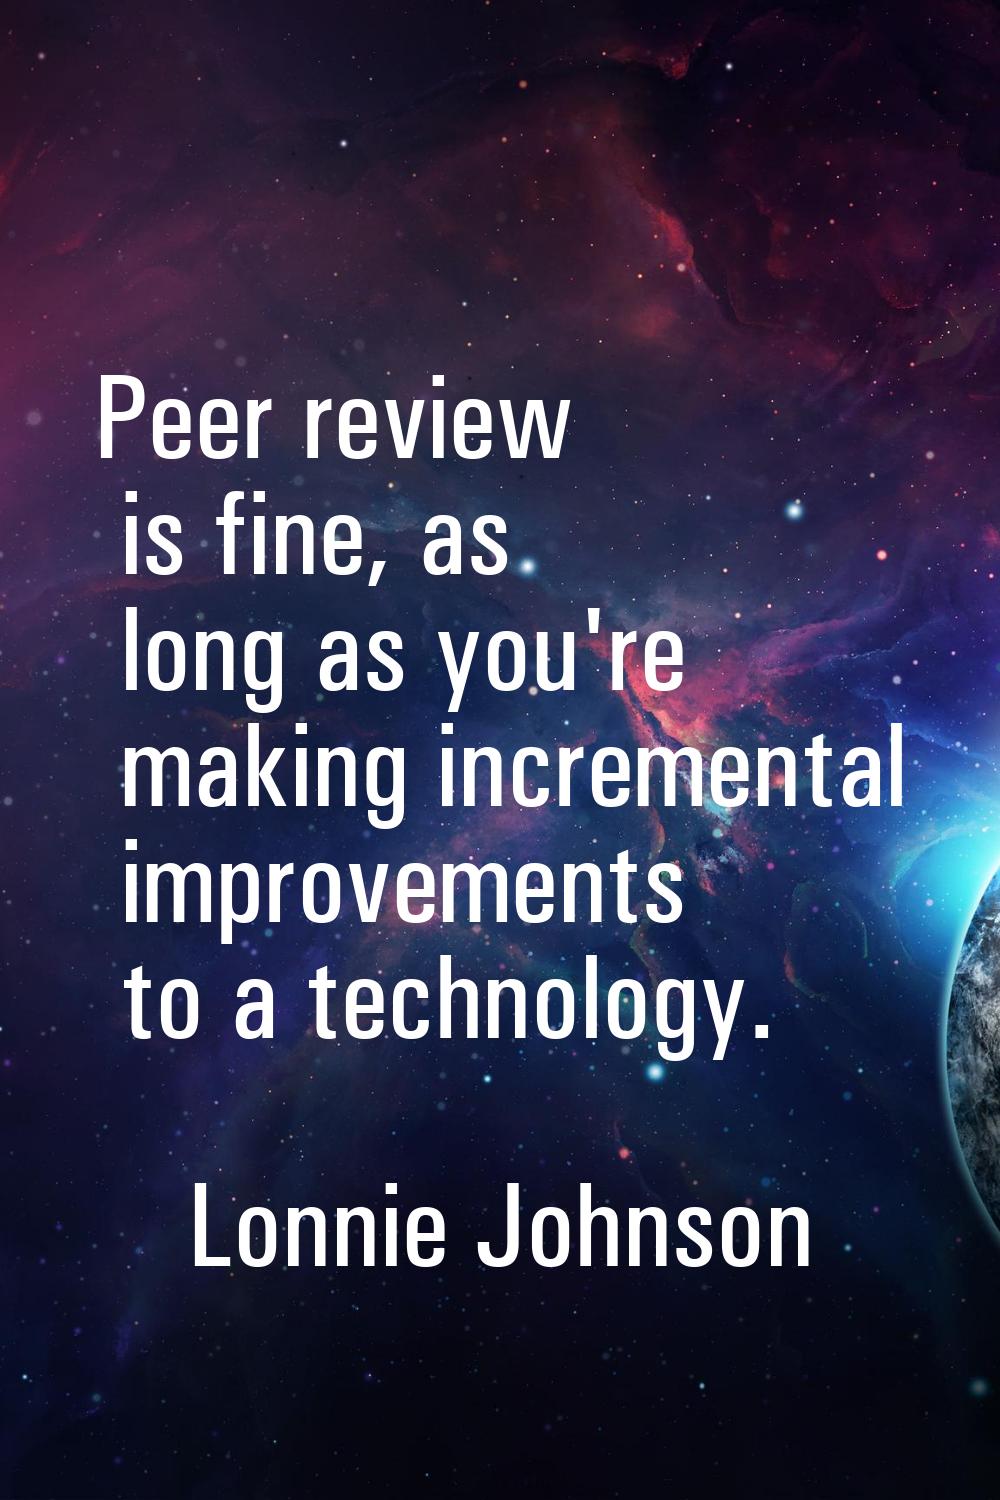 Peer review is fine, as long as you're making incremental improvements to a technology.